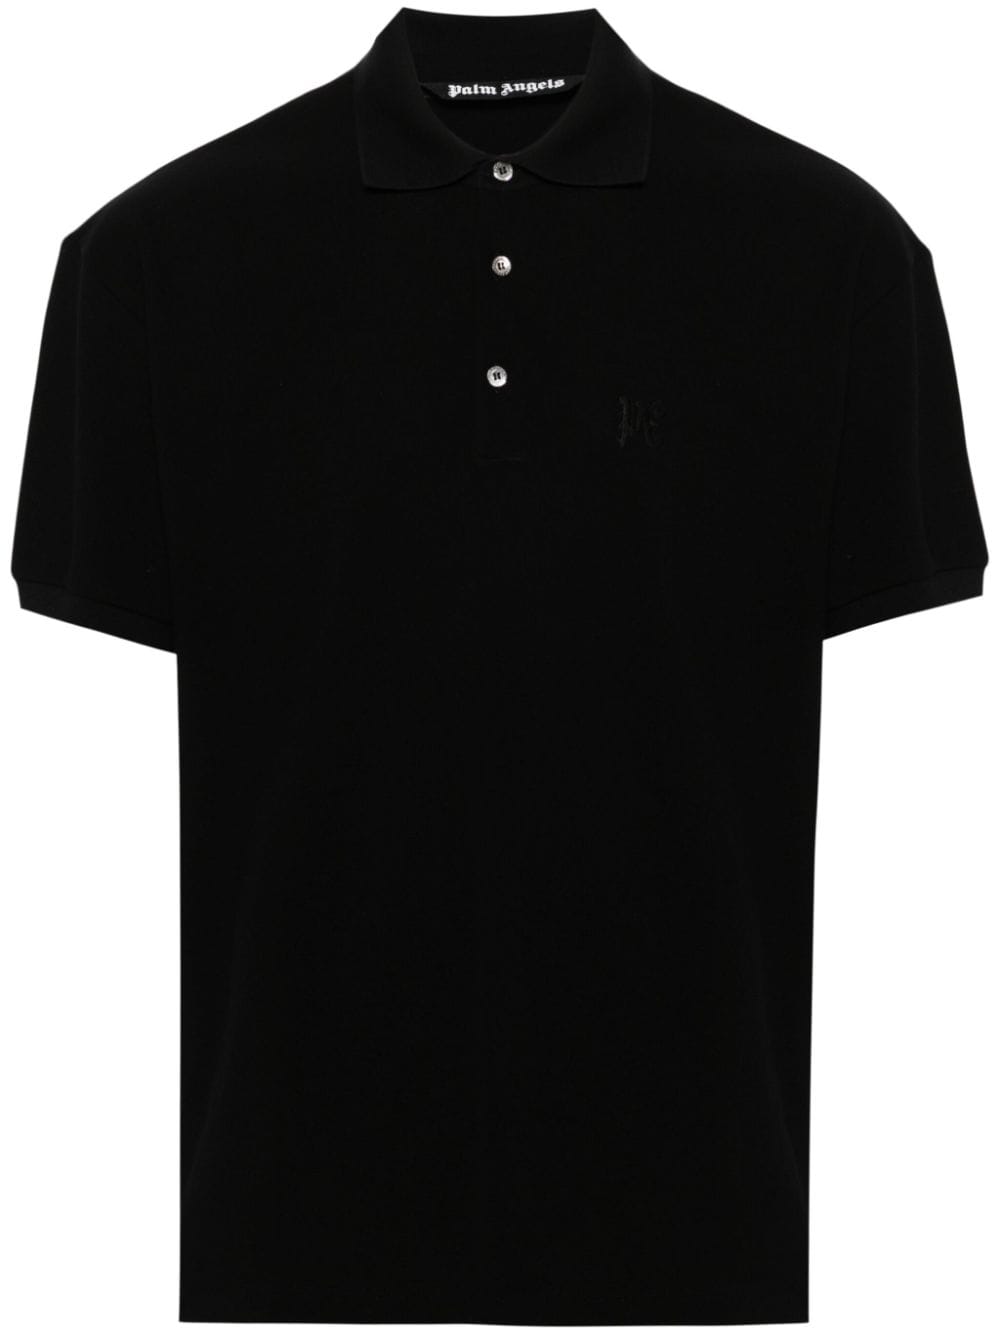 PALM ANGELS PALM ANGELS- Short-sleeved Polo Shirt